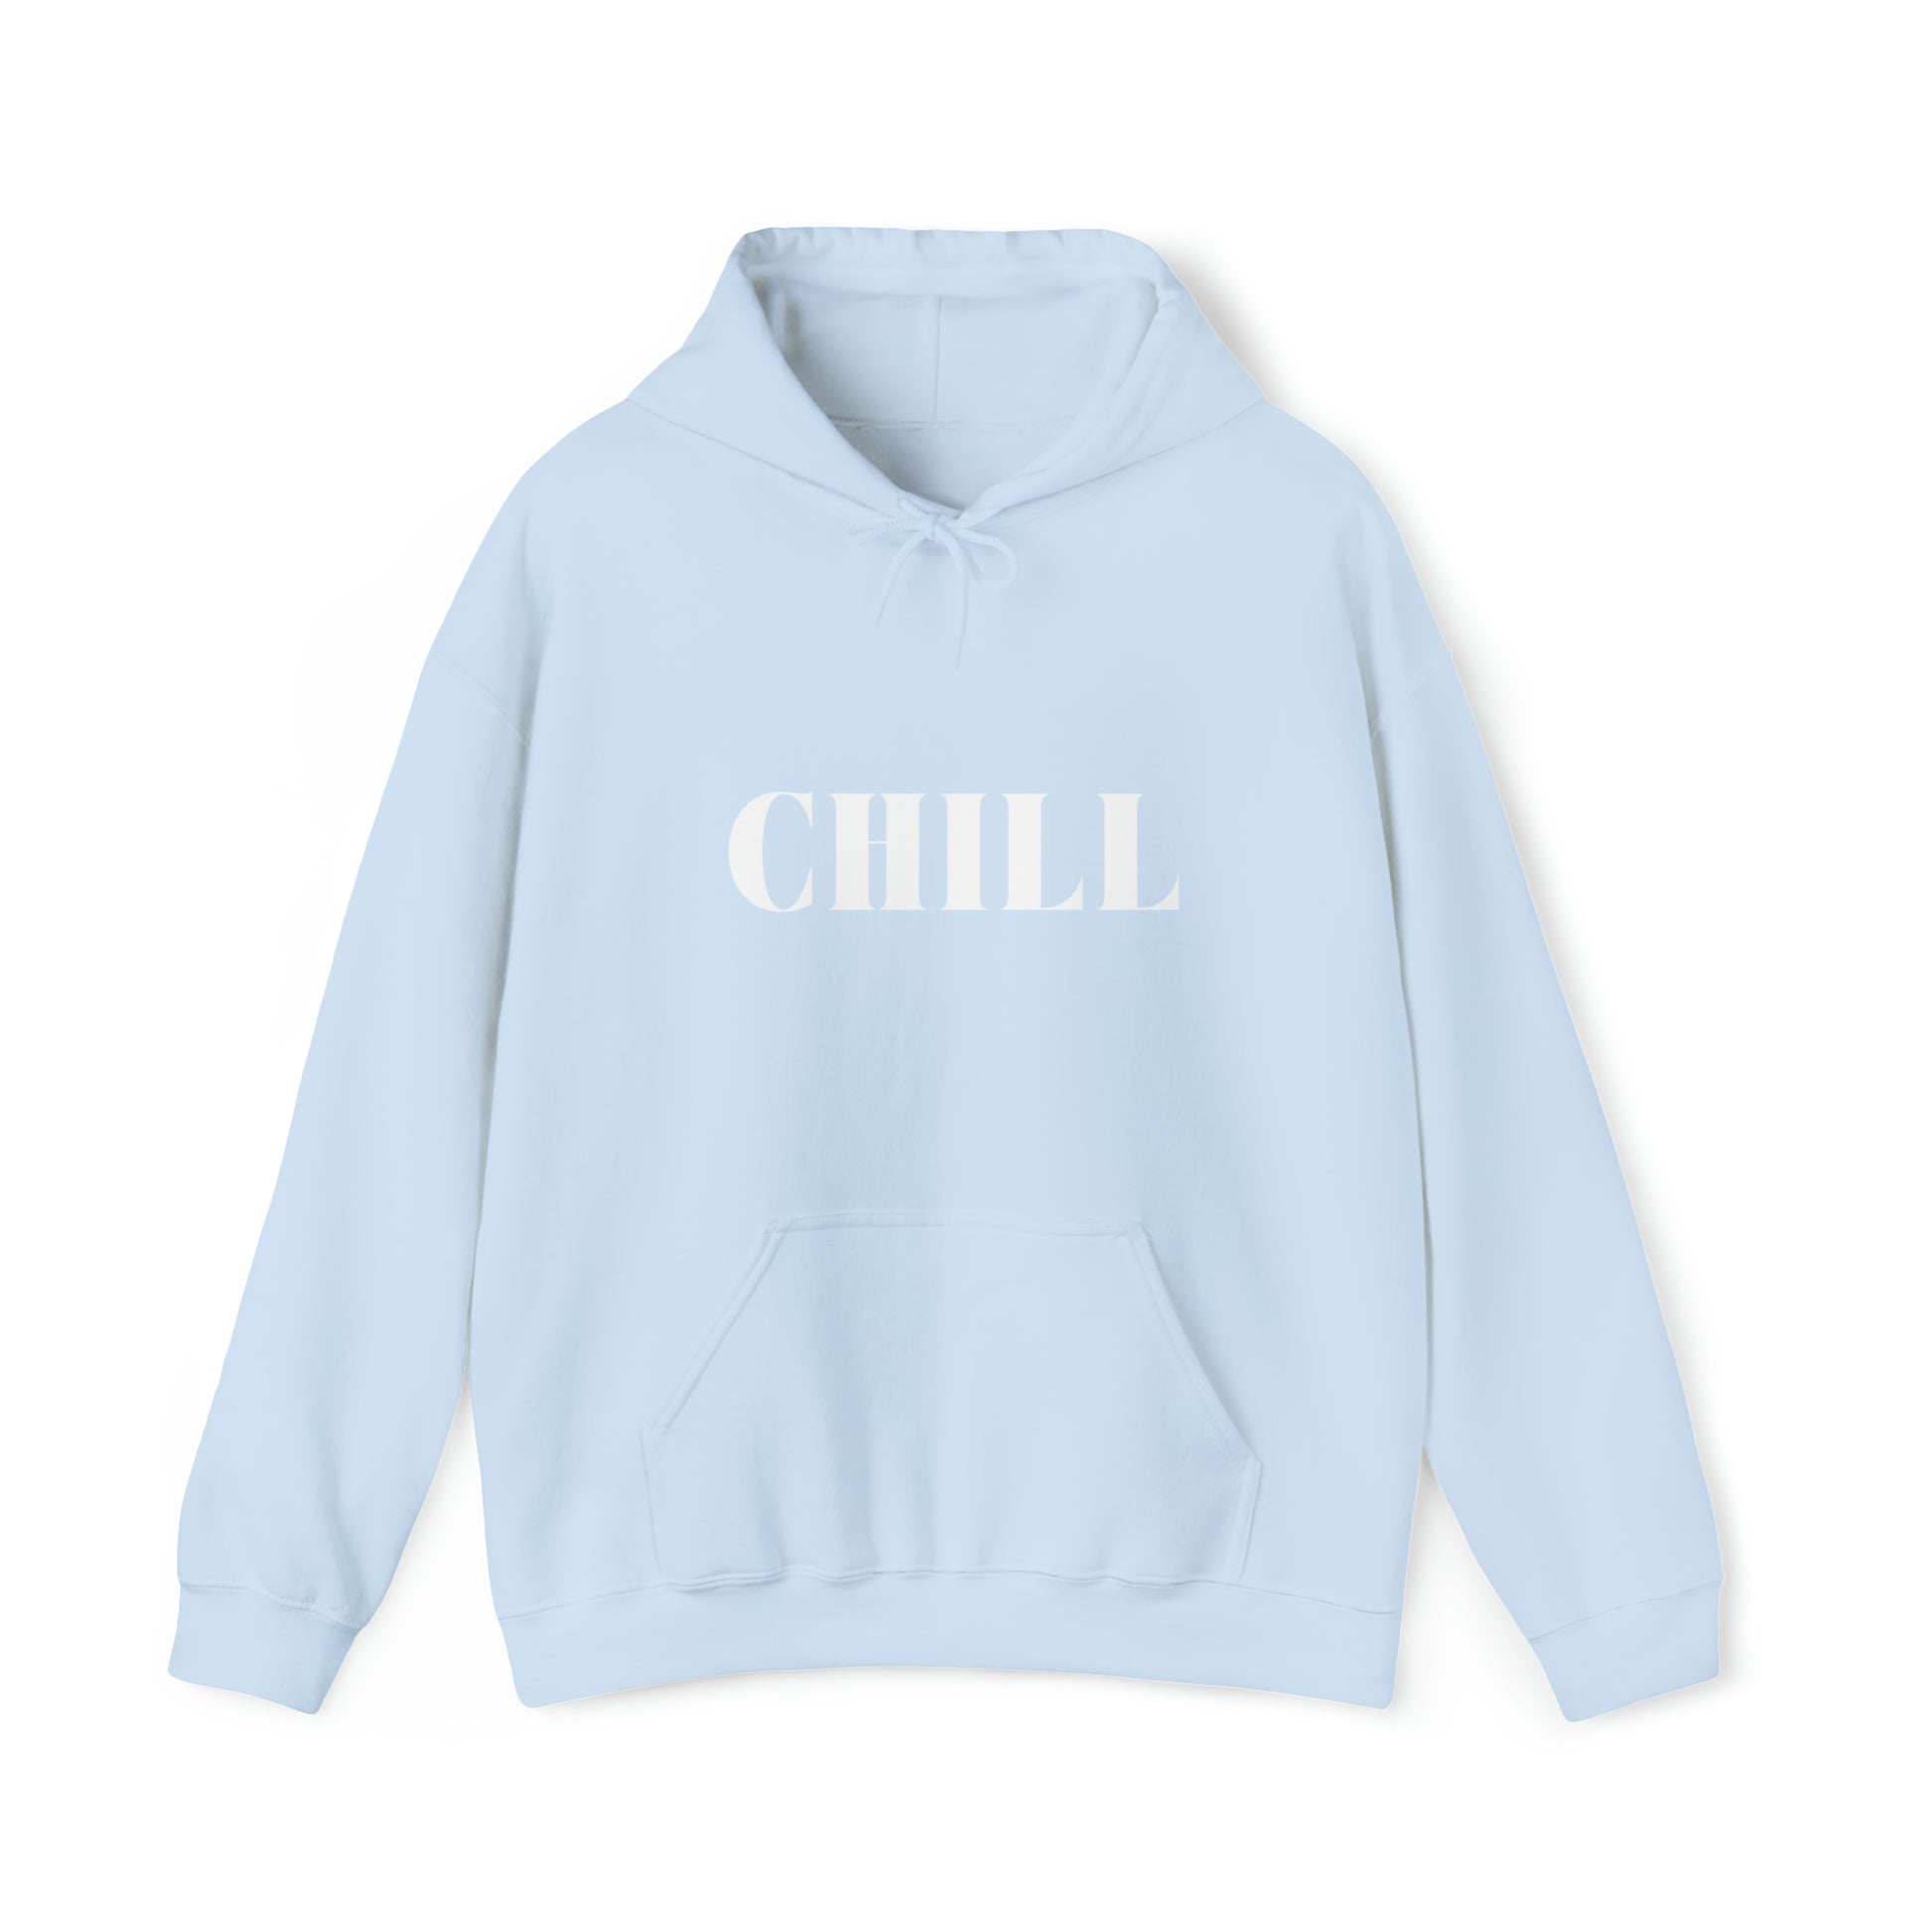 S Light Blue Chill Hoodie from HoodySZN.com